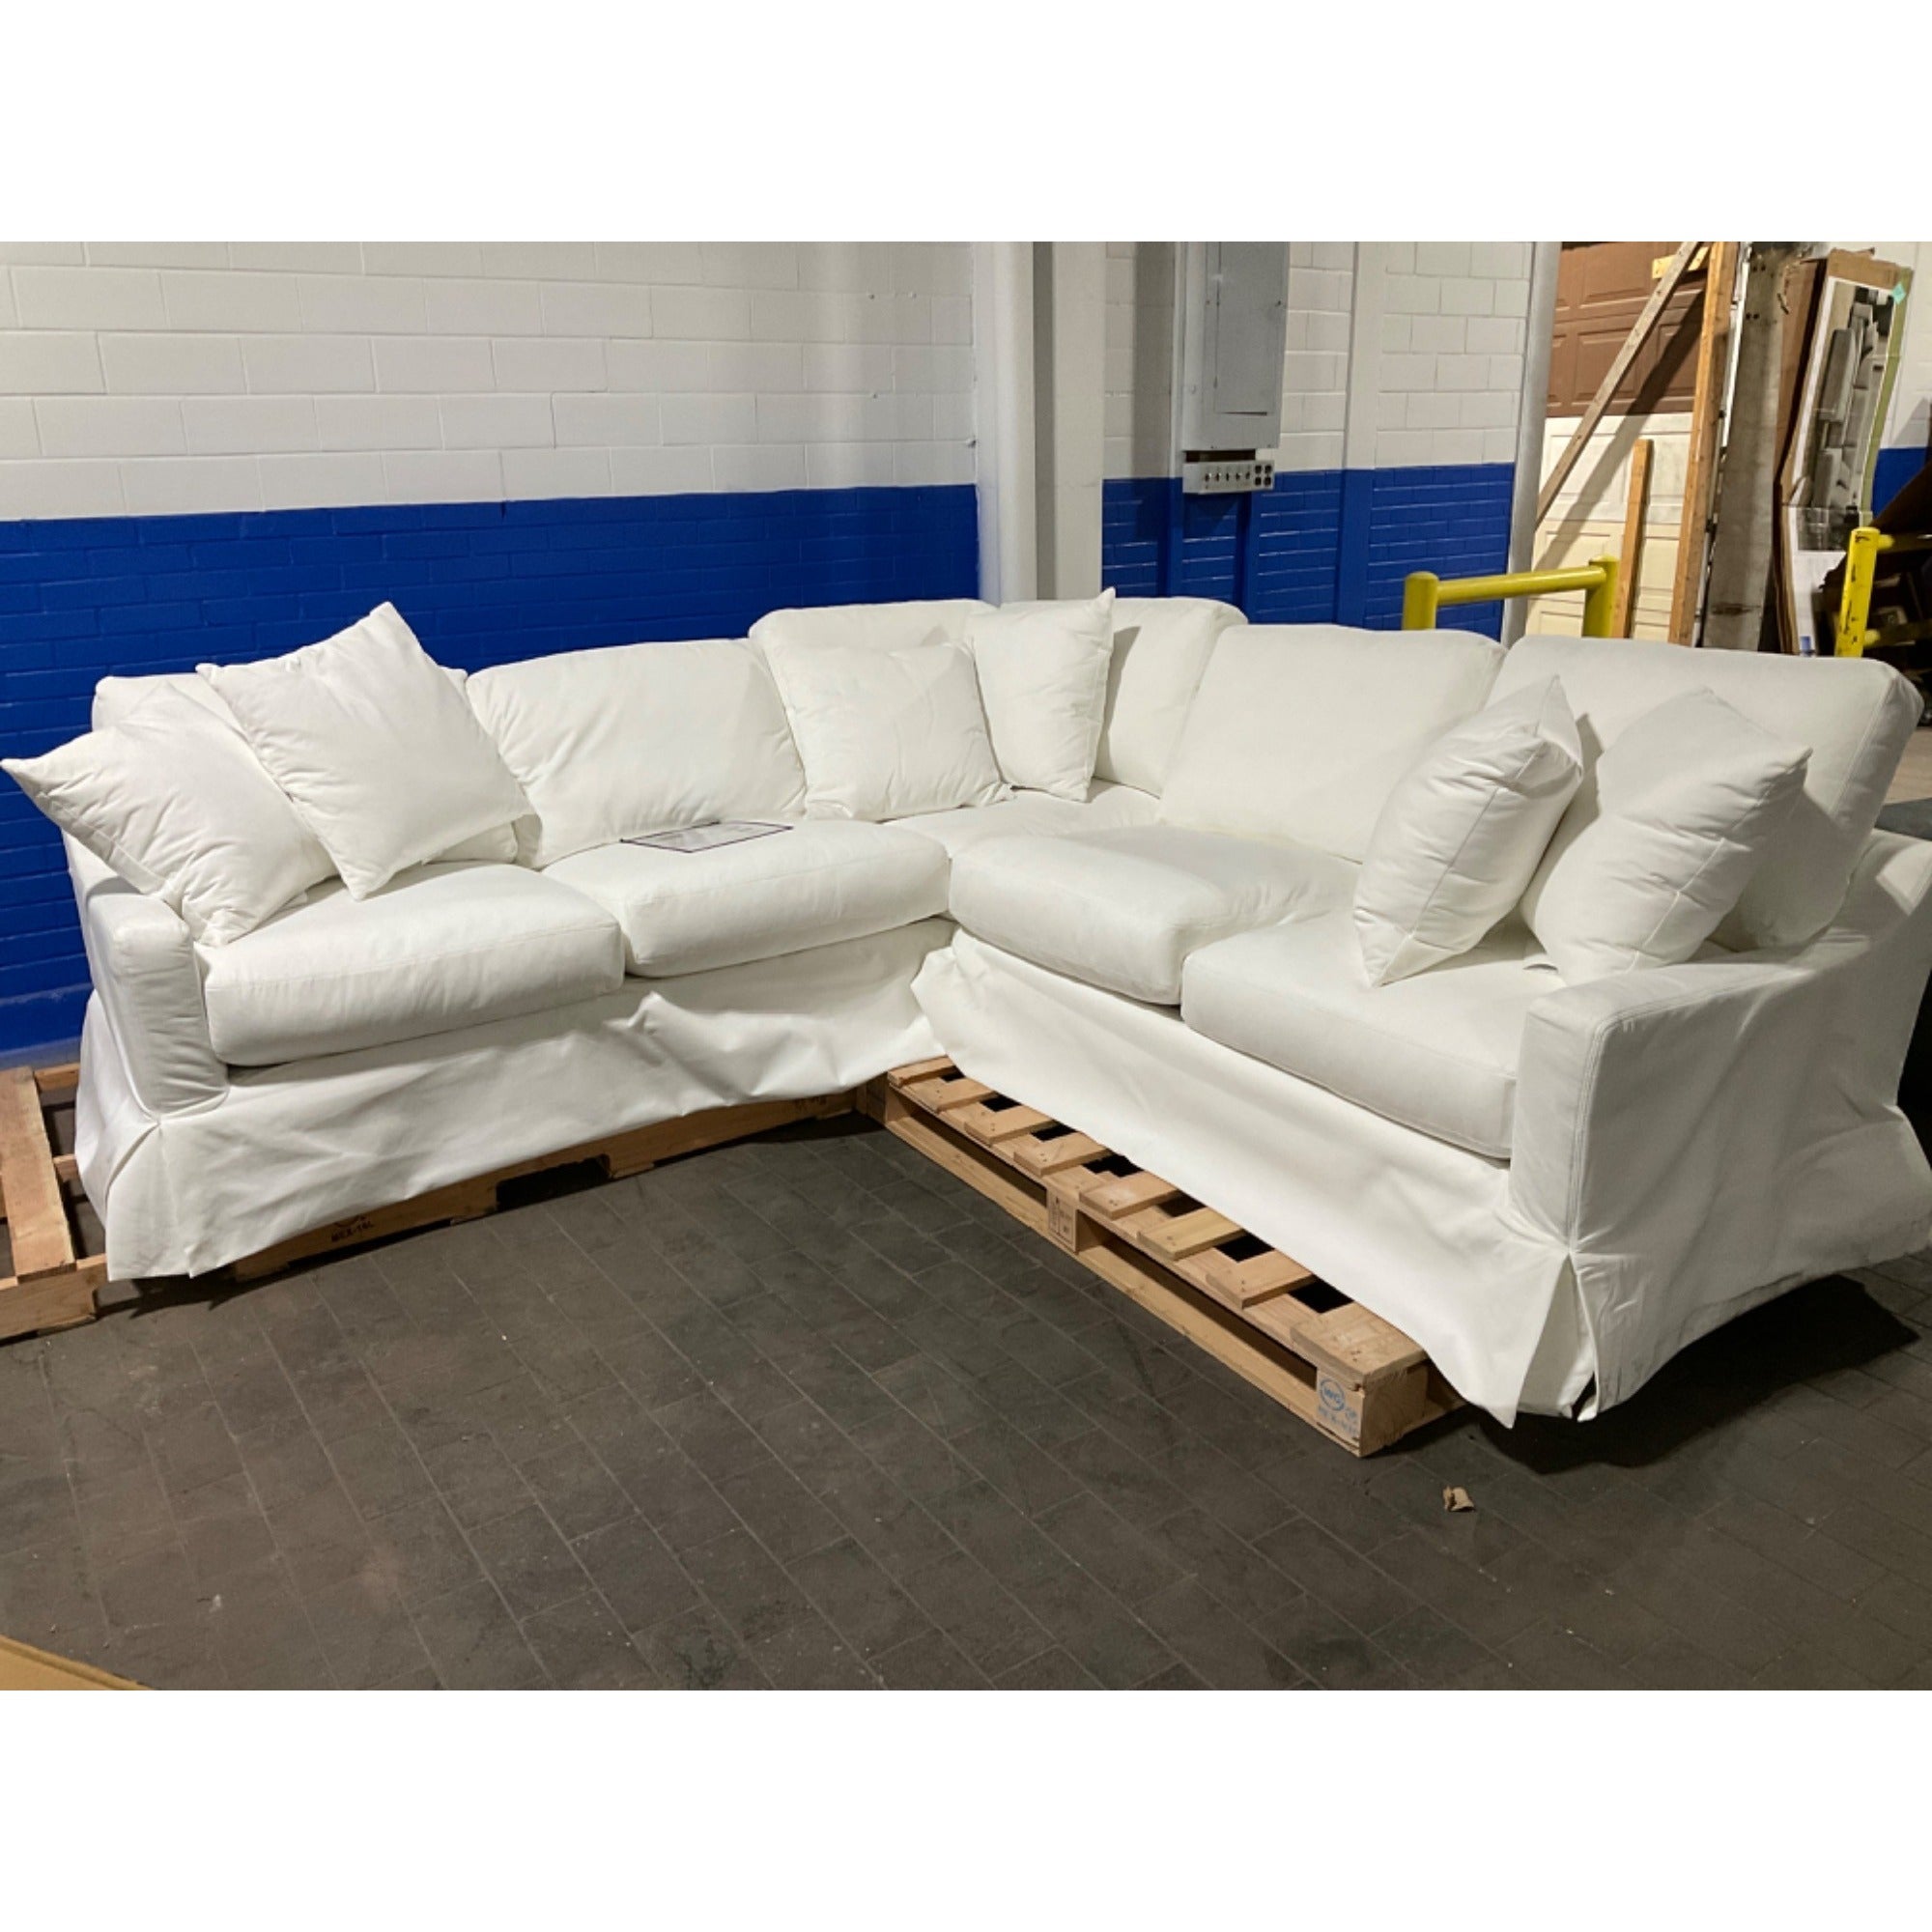 REMIE, SLIPCOVER SECTIONAL